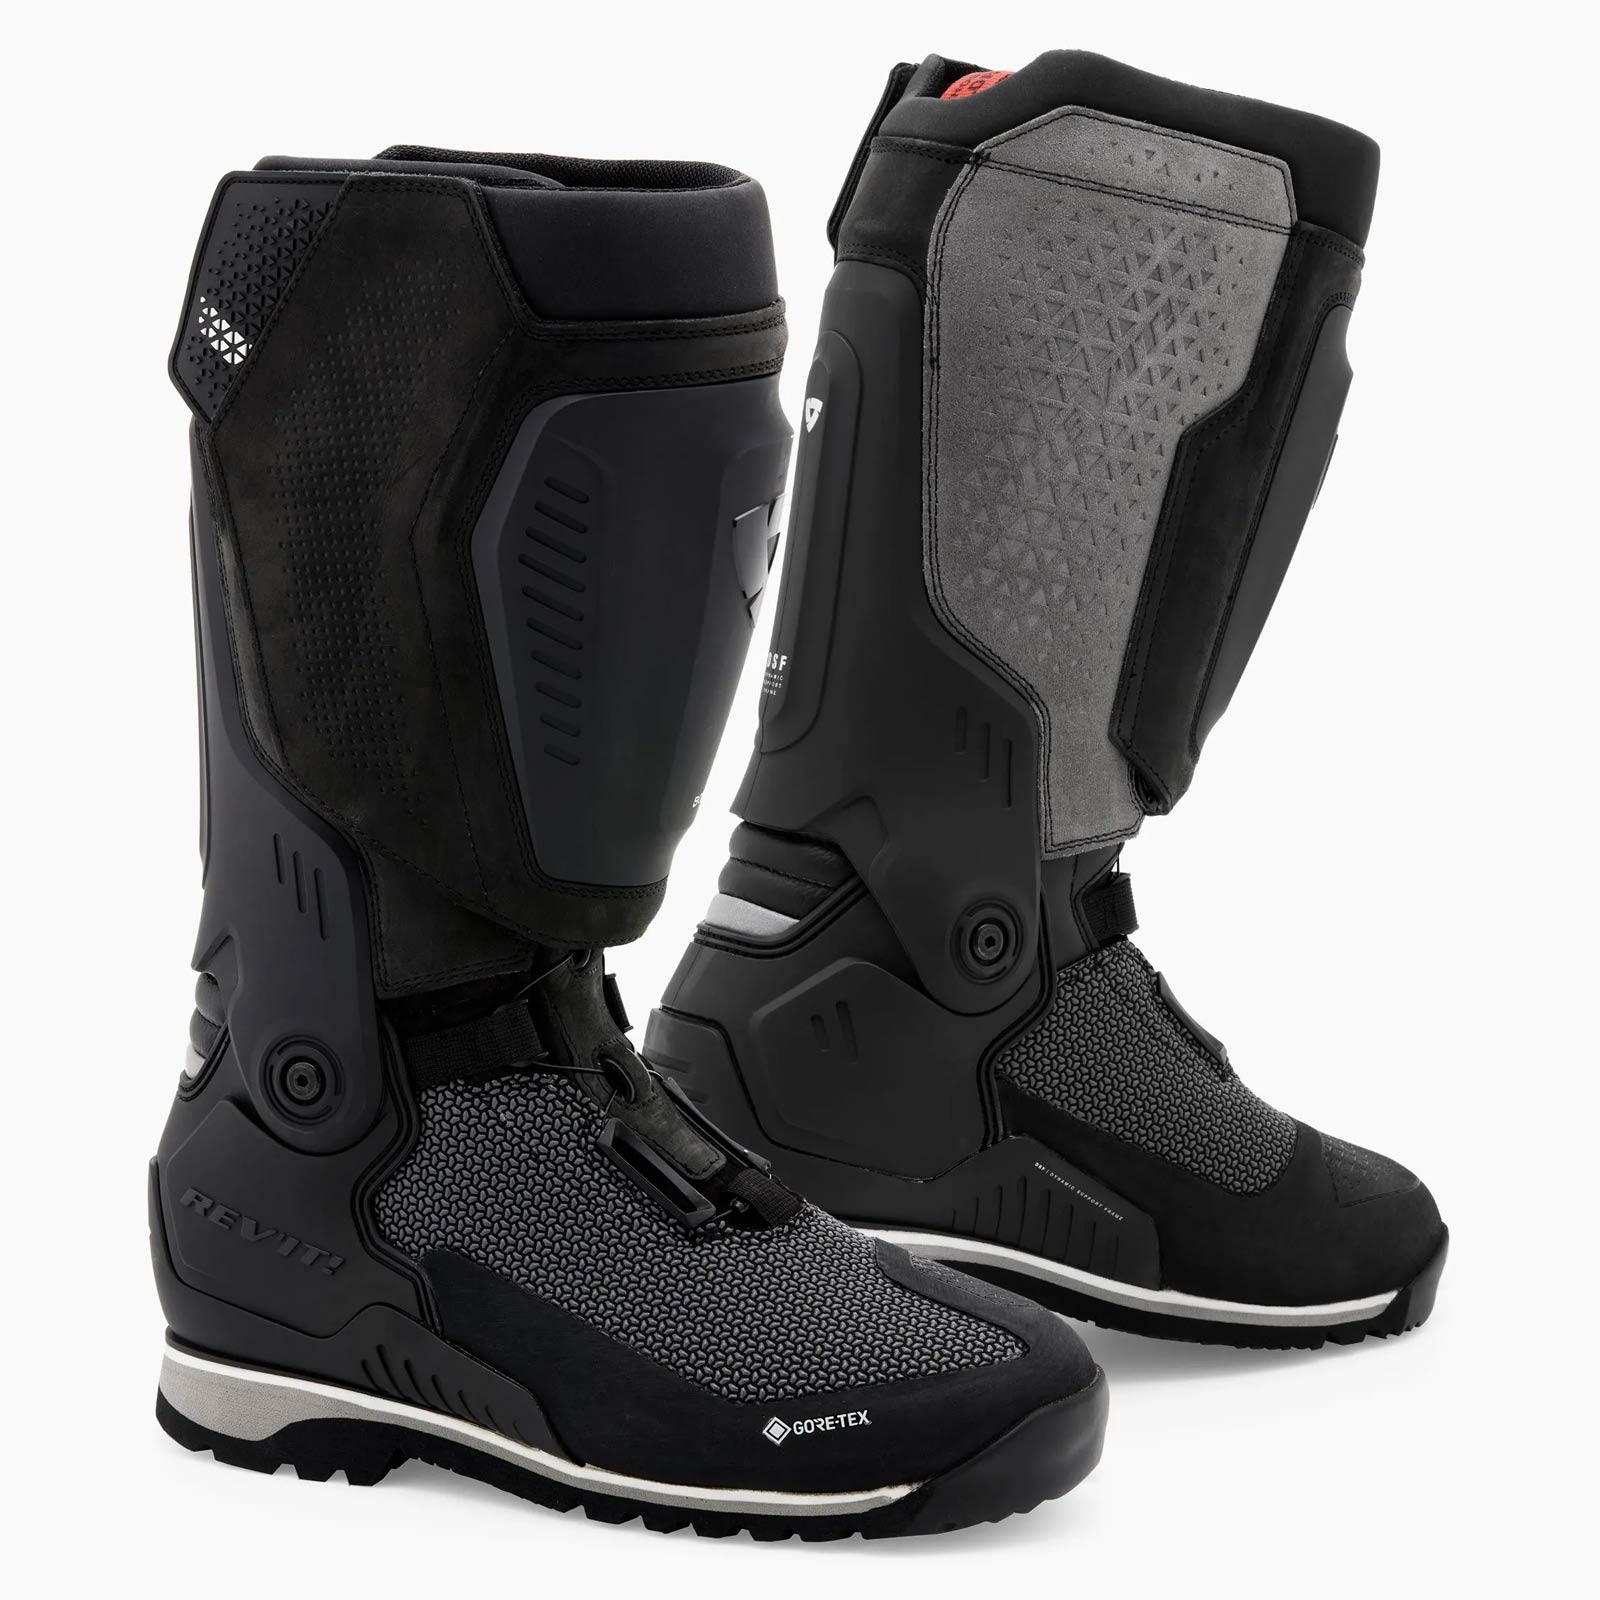 REV'IT! EXPEDITION GTX Boots